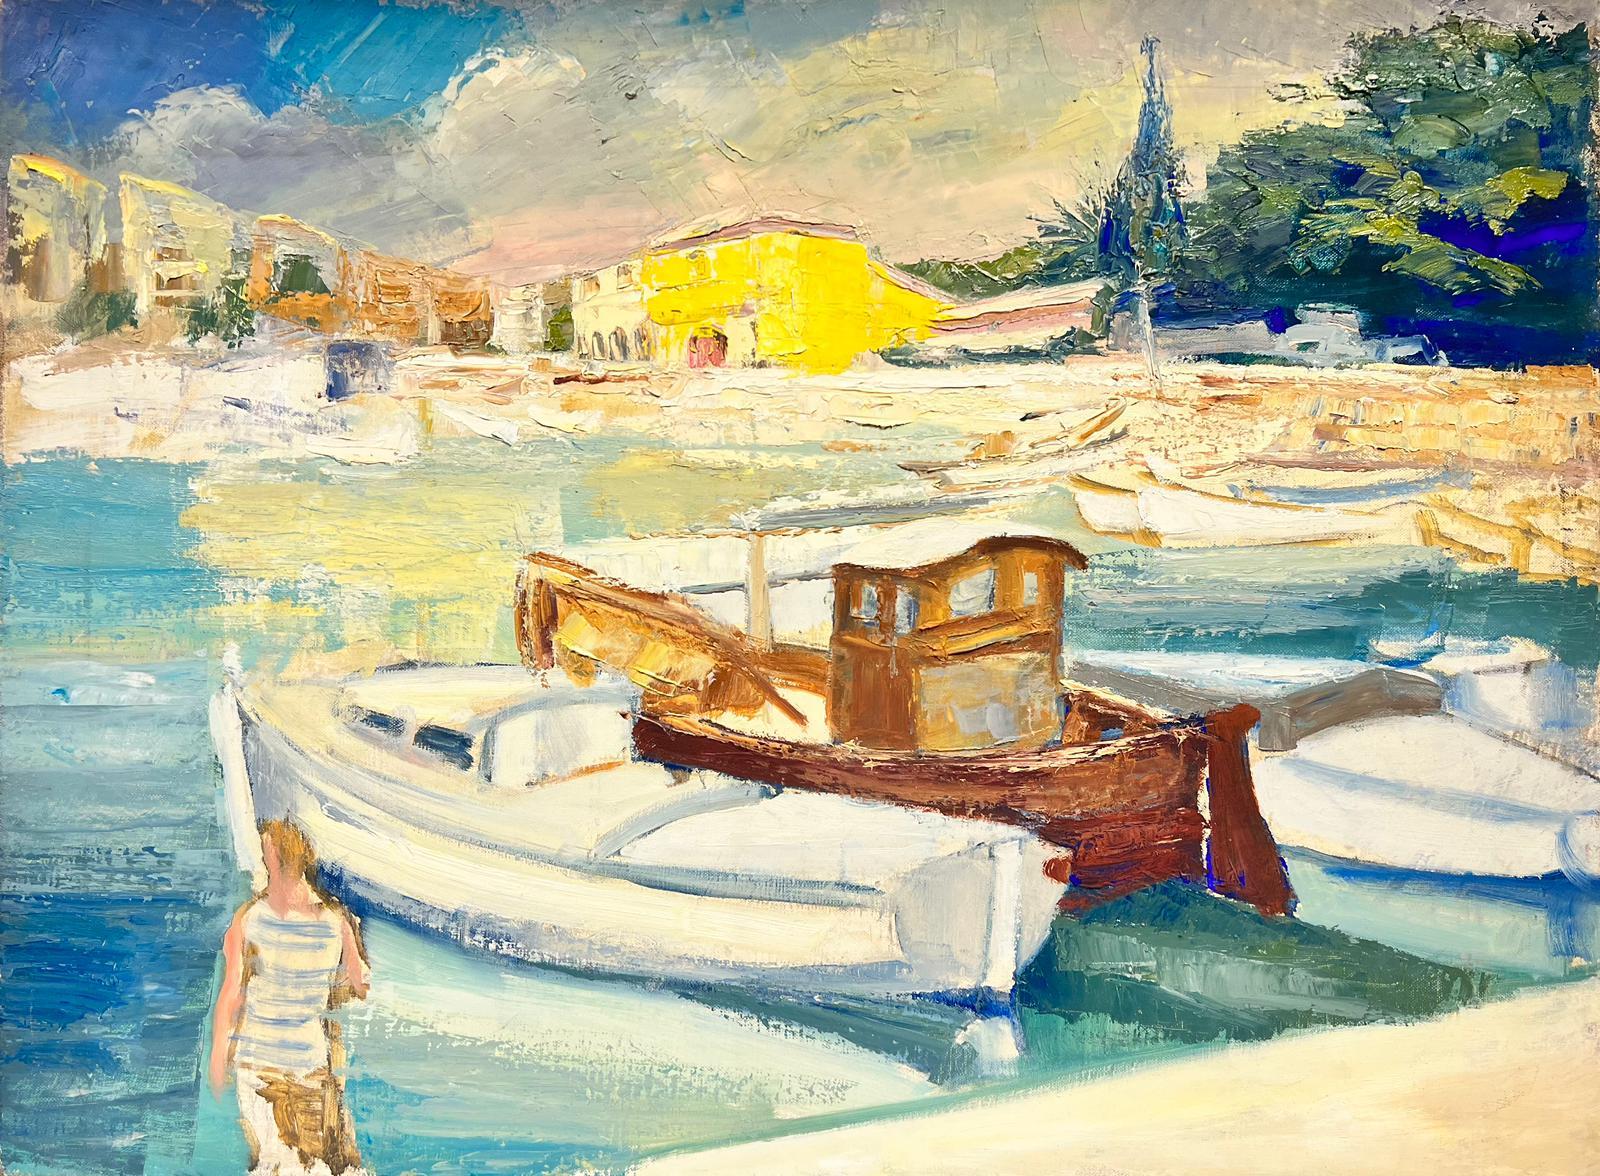 Josine Vignon Landscape Painting - South of France Mediterranean Tranquil Harbour Boats & Figure 1950's French Oil